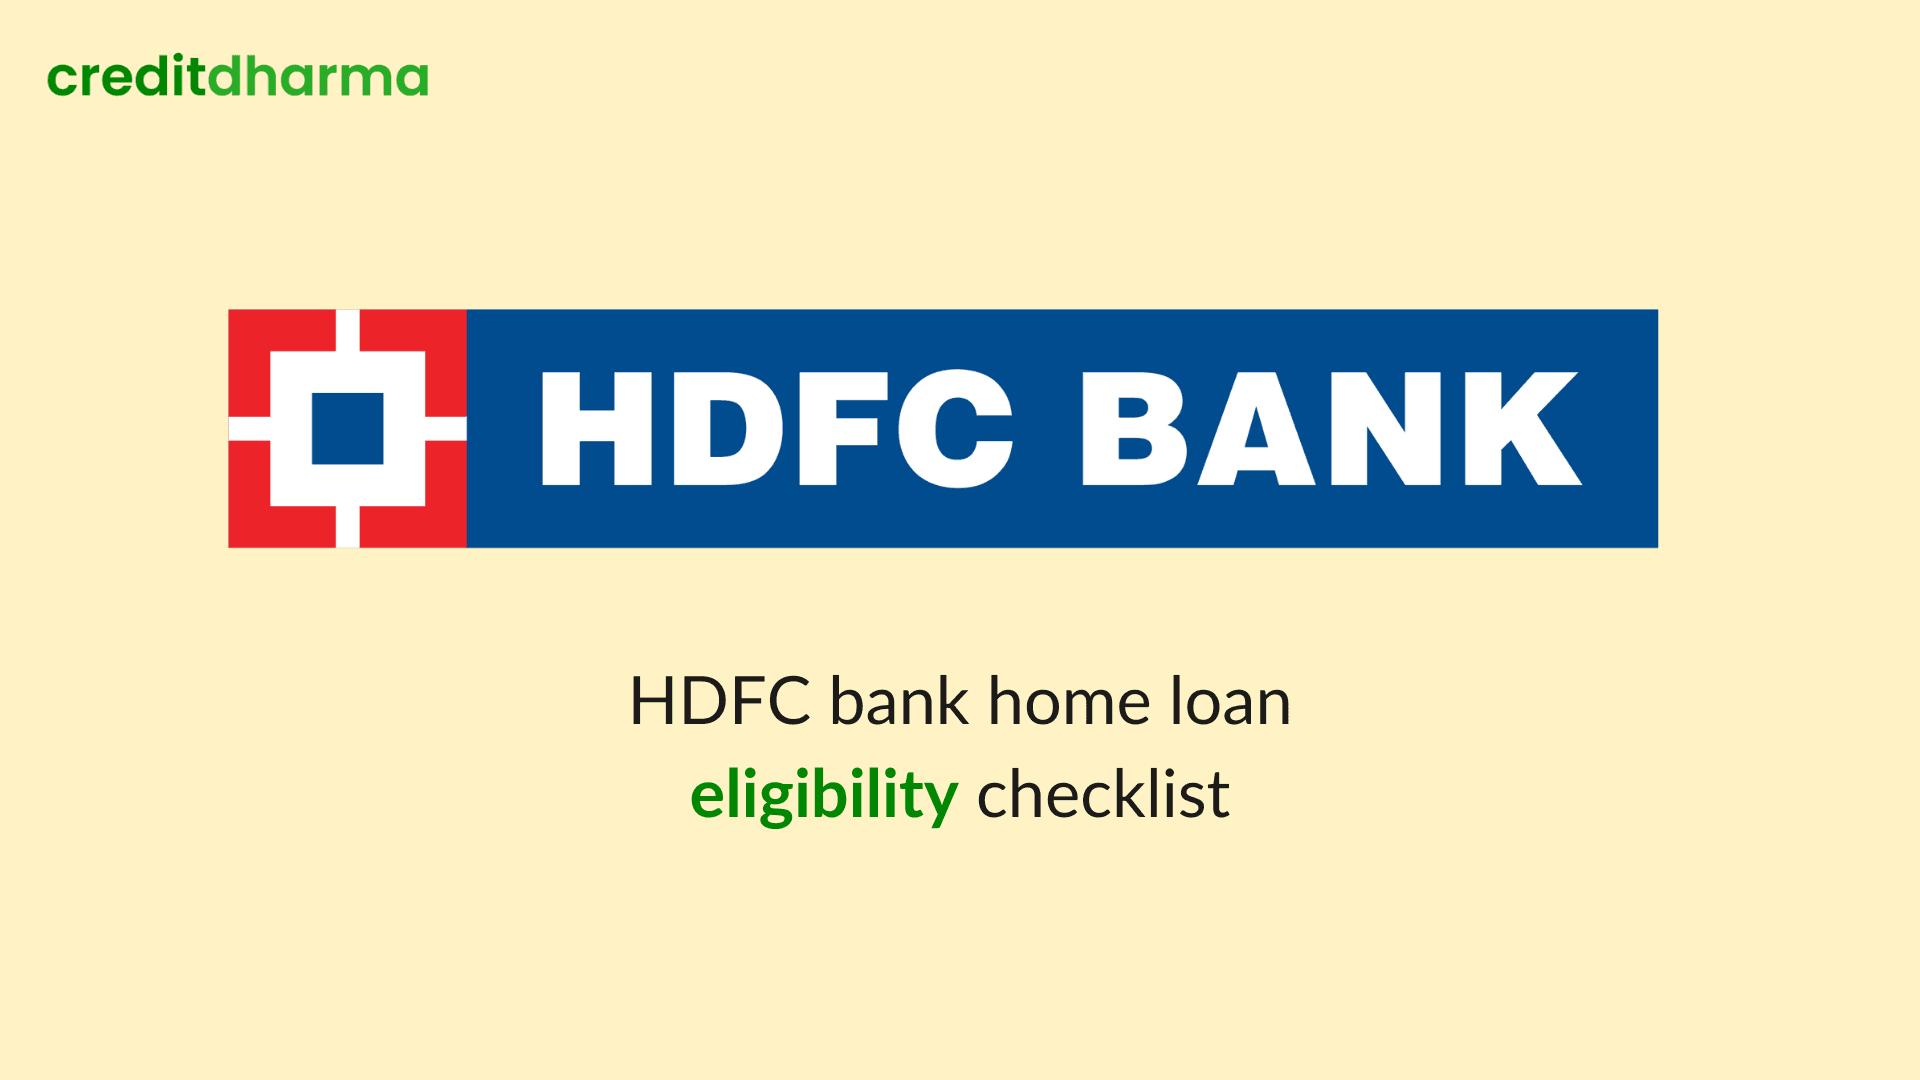 Cover Image for HDFC bank home loan eligibility checklist